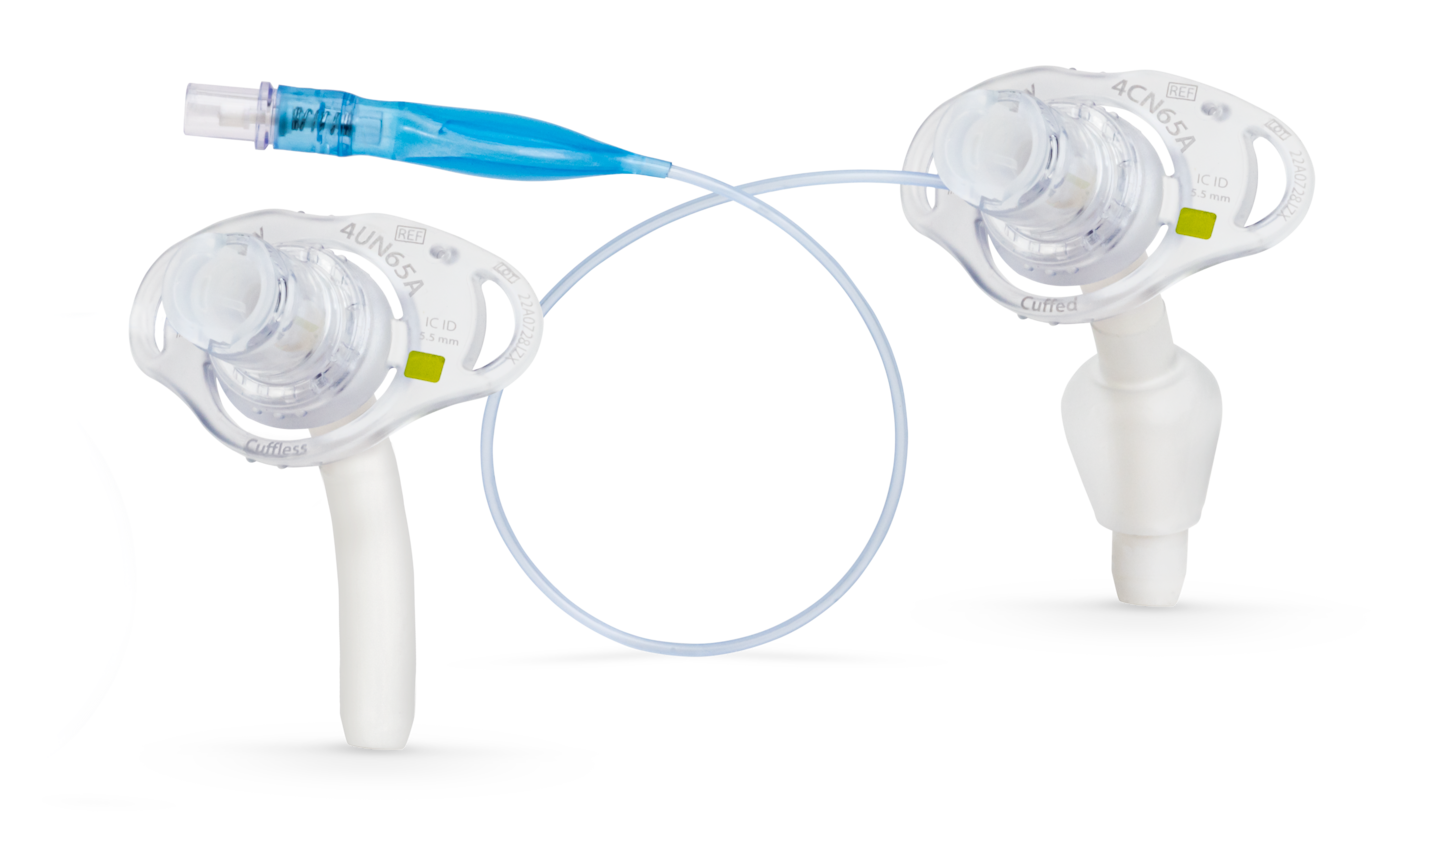 Photoshoot featuring the Shiley flexible, cuffless tracheostomy tube with etched flange.